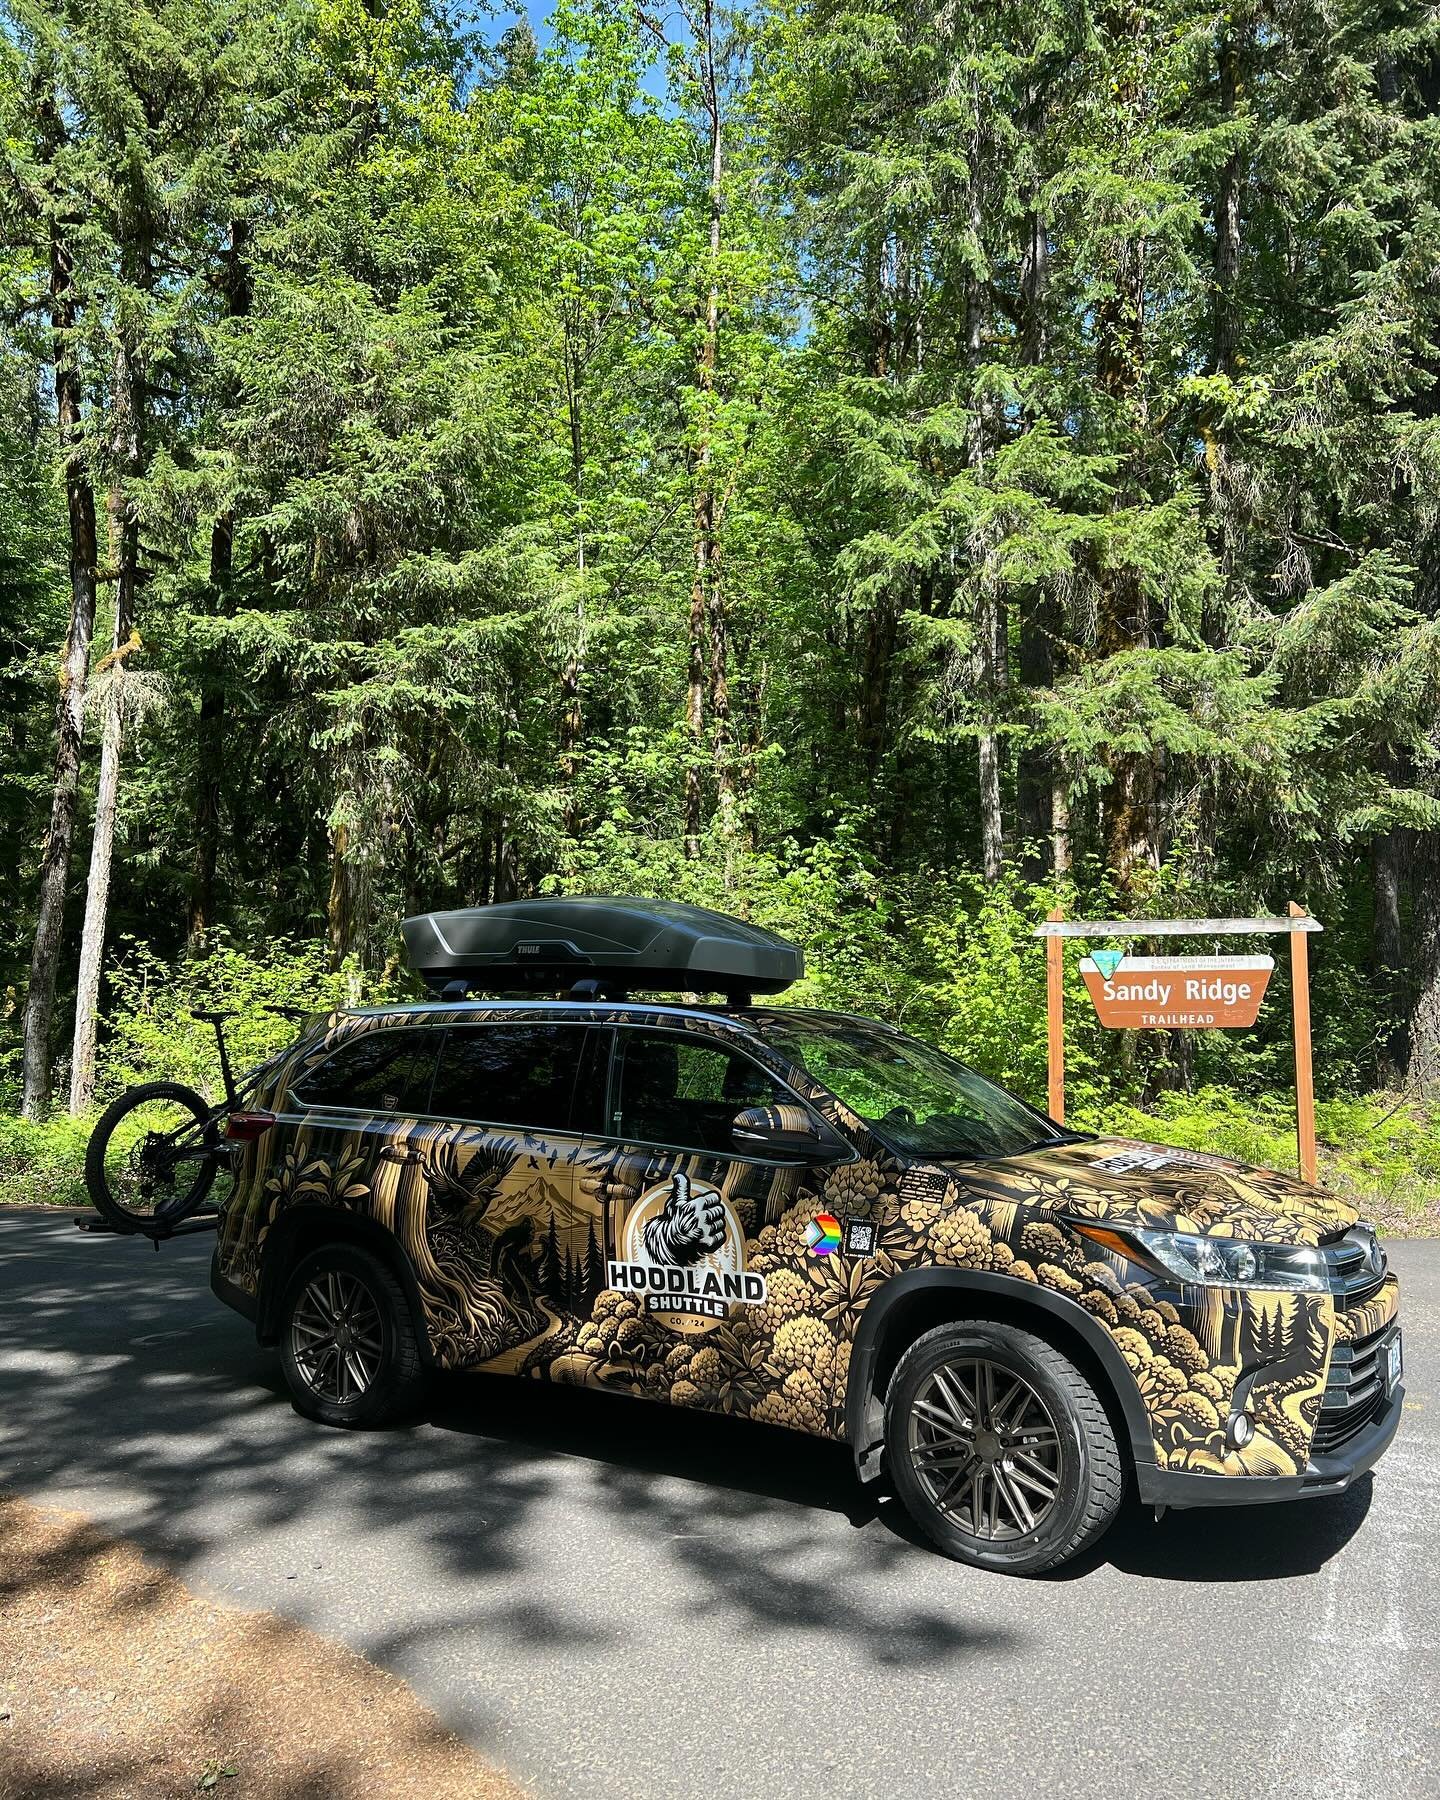 Visiting Mt. Hood and don&rsquo;t have a bike or a bike rack!? We can help with that! Our friends at @goodwynns can get you set up with a bike and we can transport you and your bike to Sandy Ridge for some epic laps! 

#connectingcommunities #hoodlan